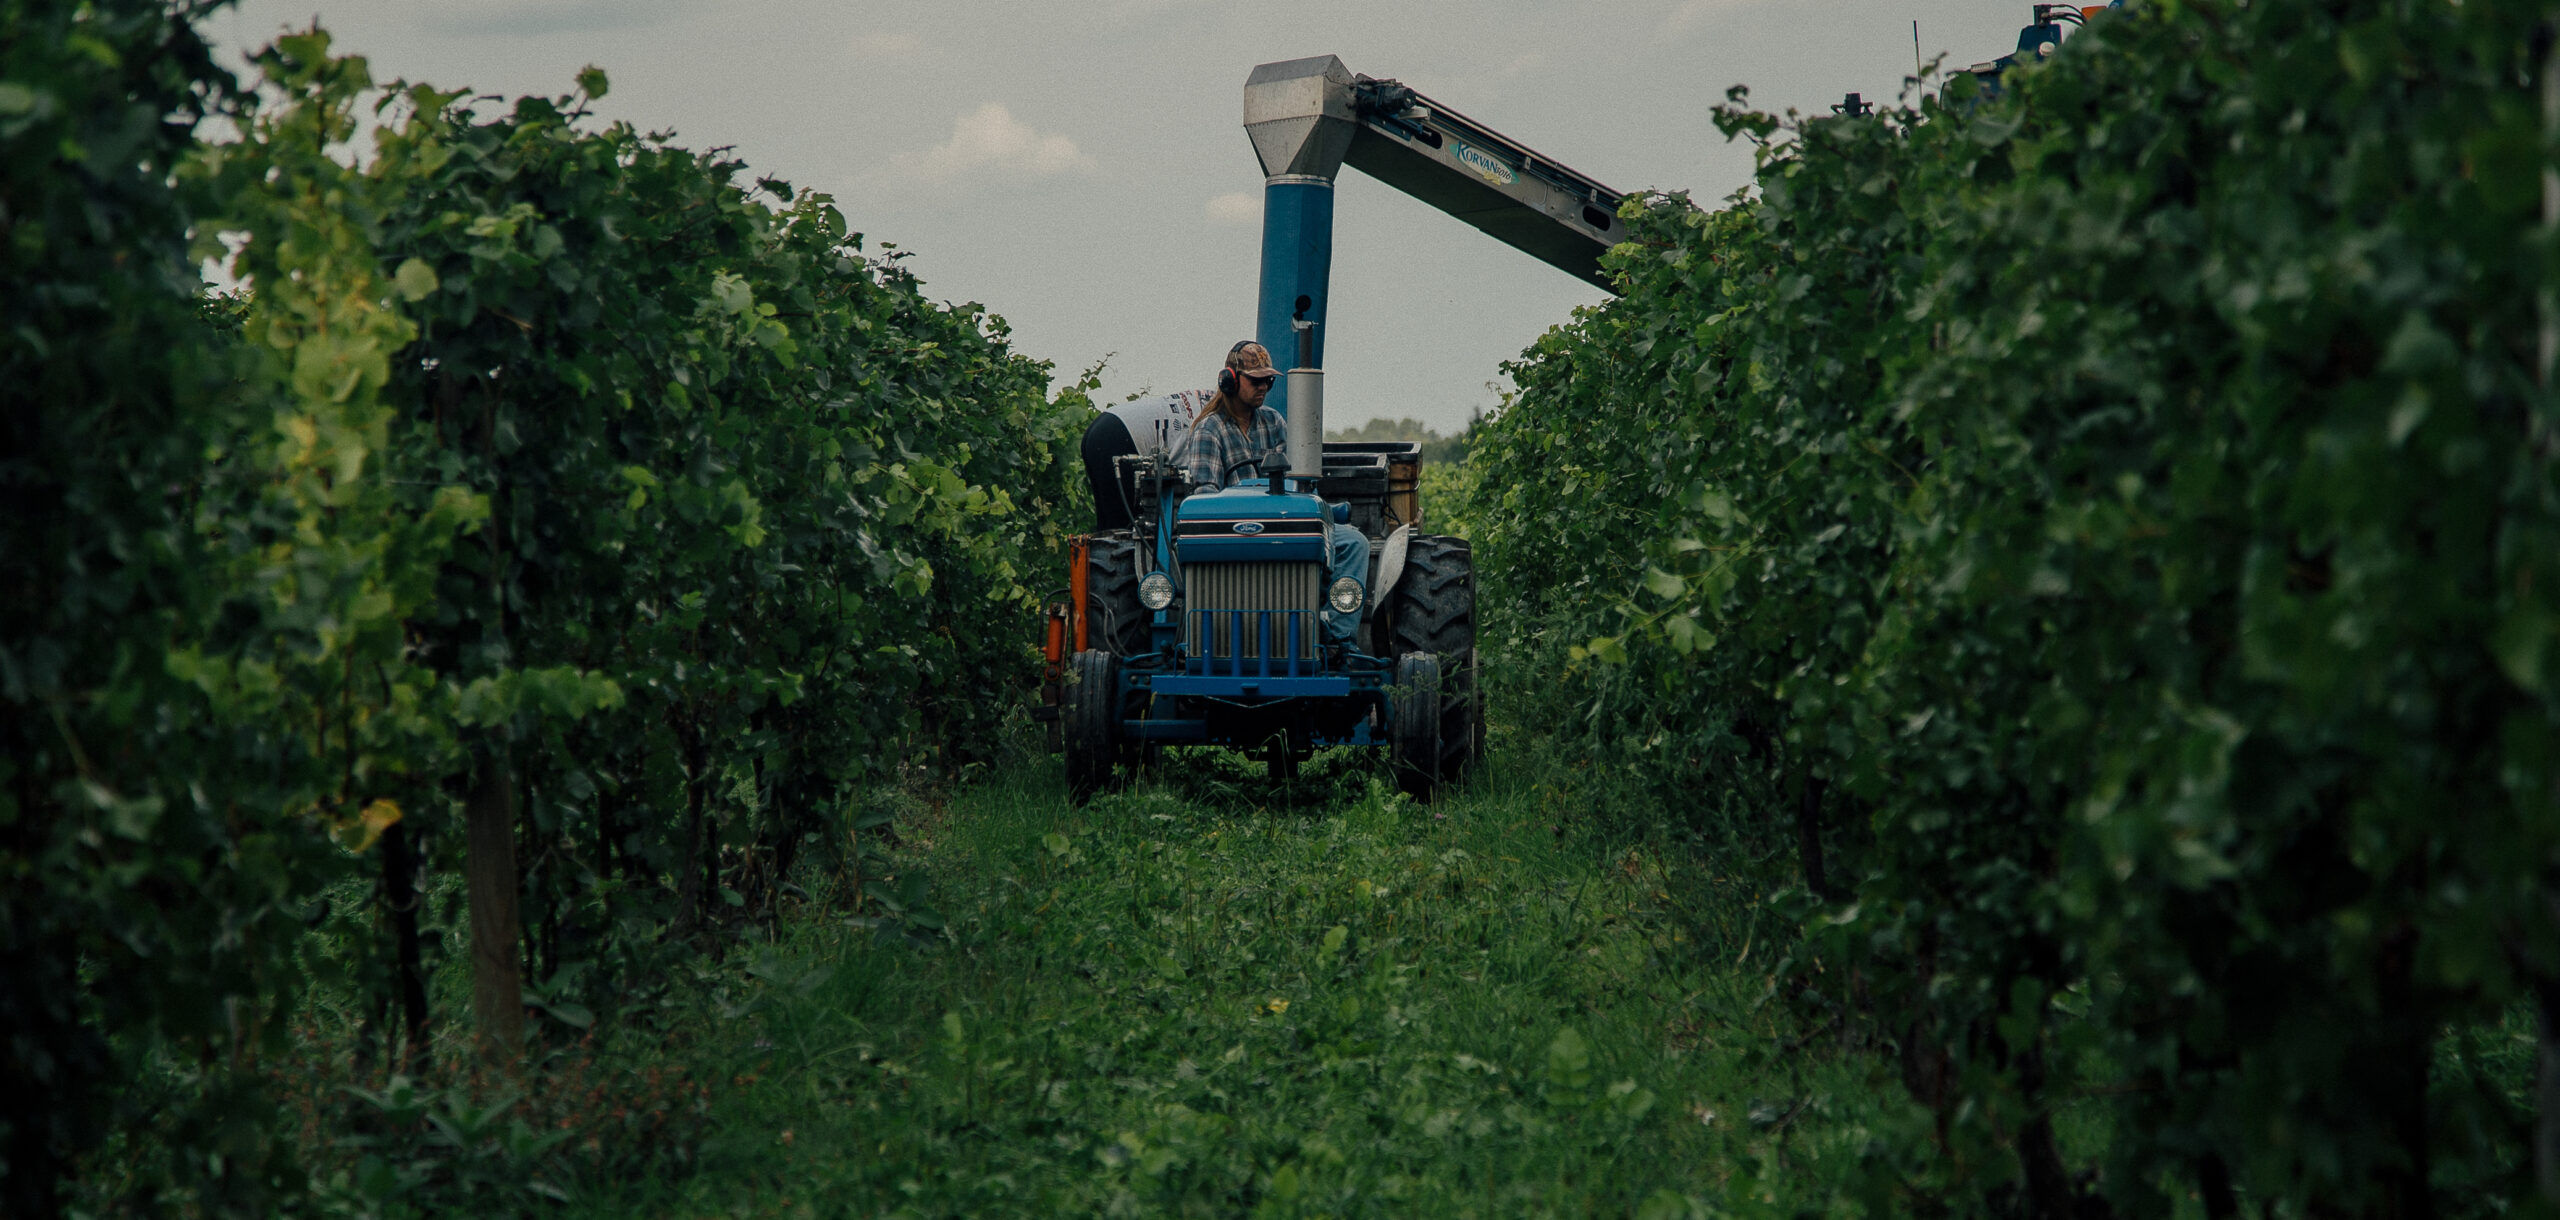 A tractor is moving between two rows of grape vines as a harvester spouts newly picked grapes into the bin.